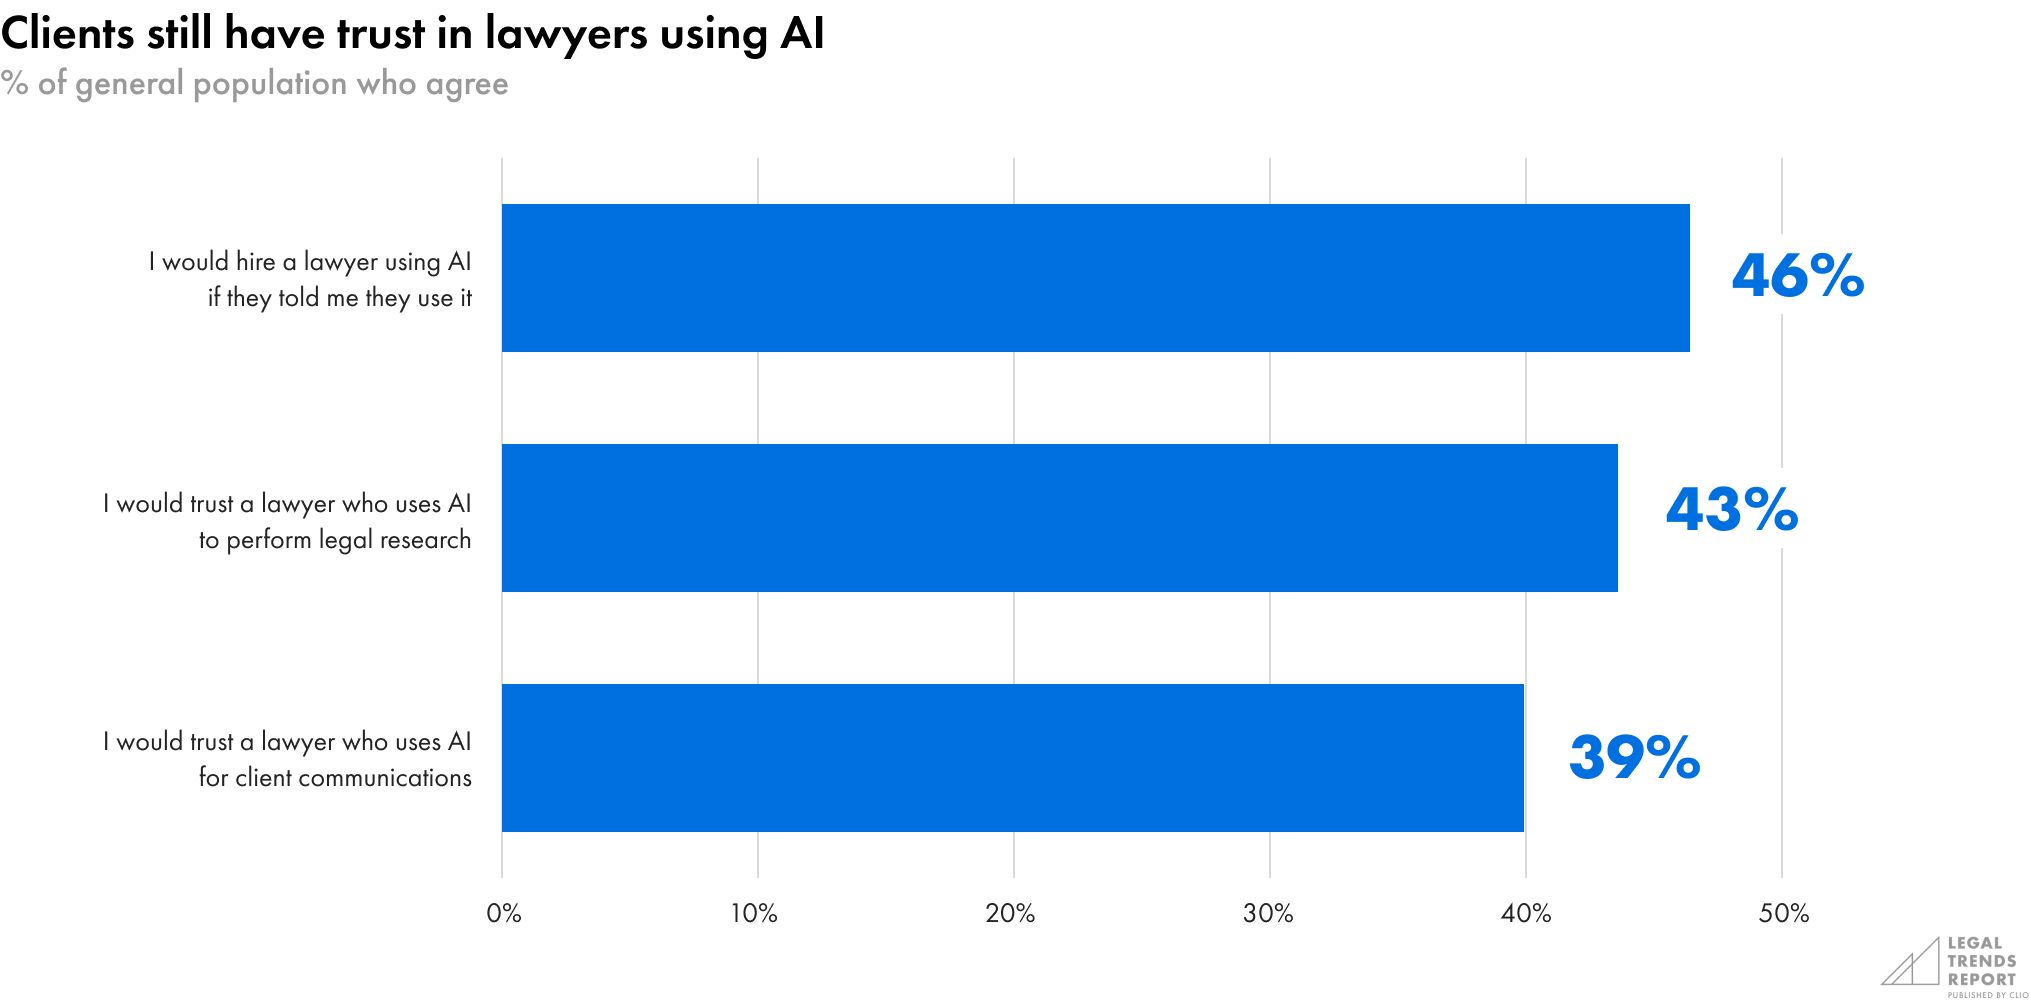 Clients still have trust in lawyers using AI